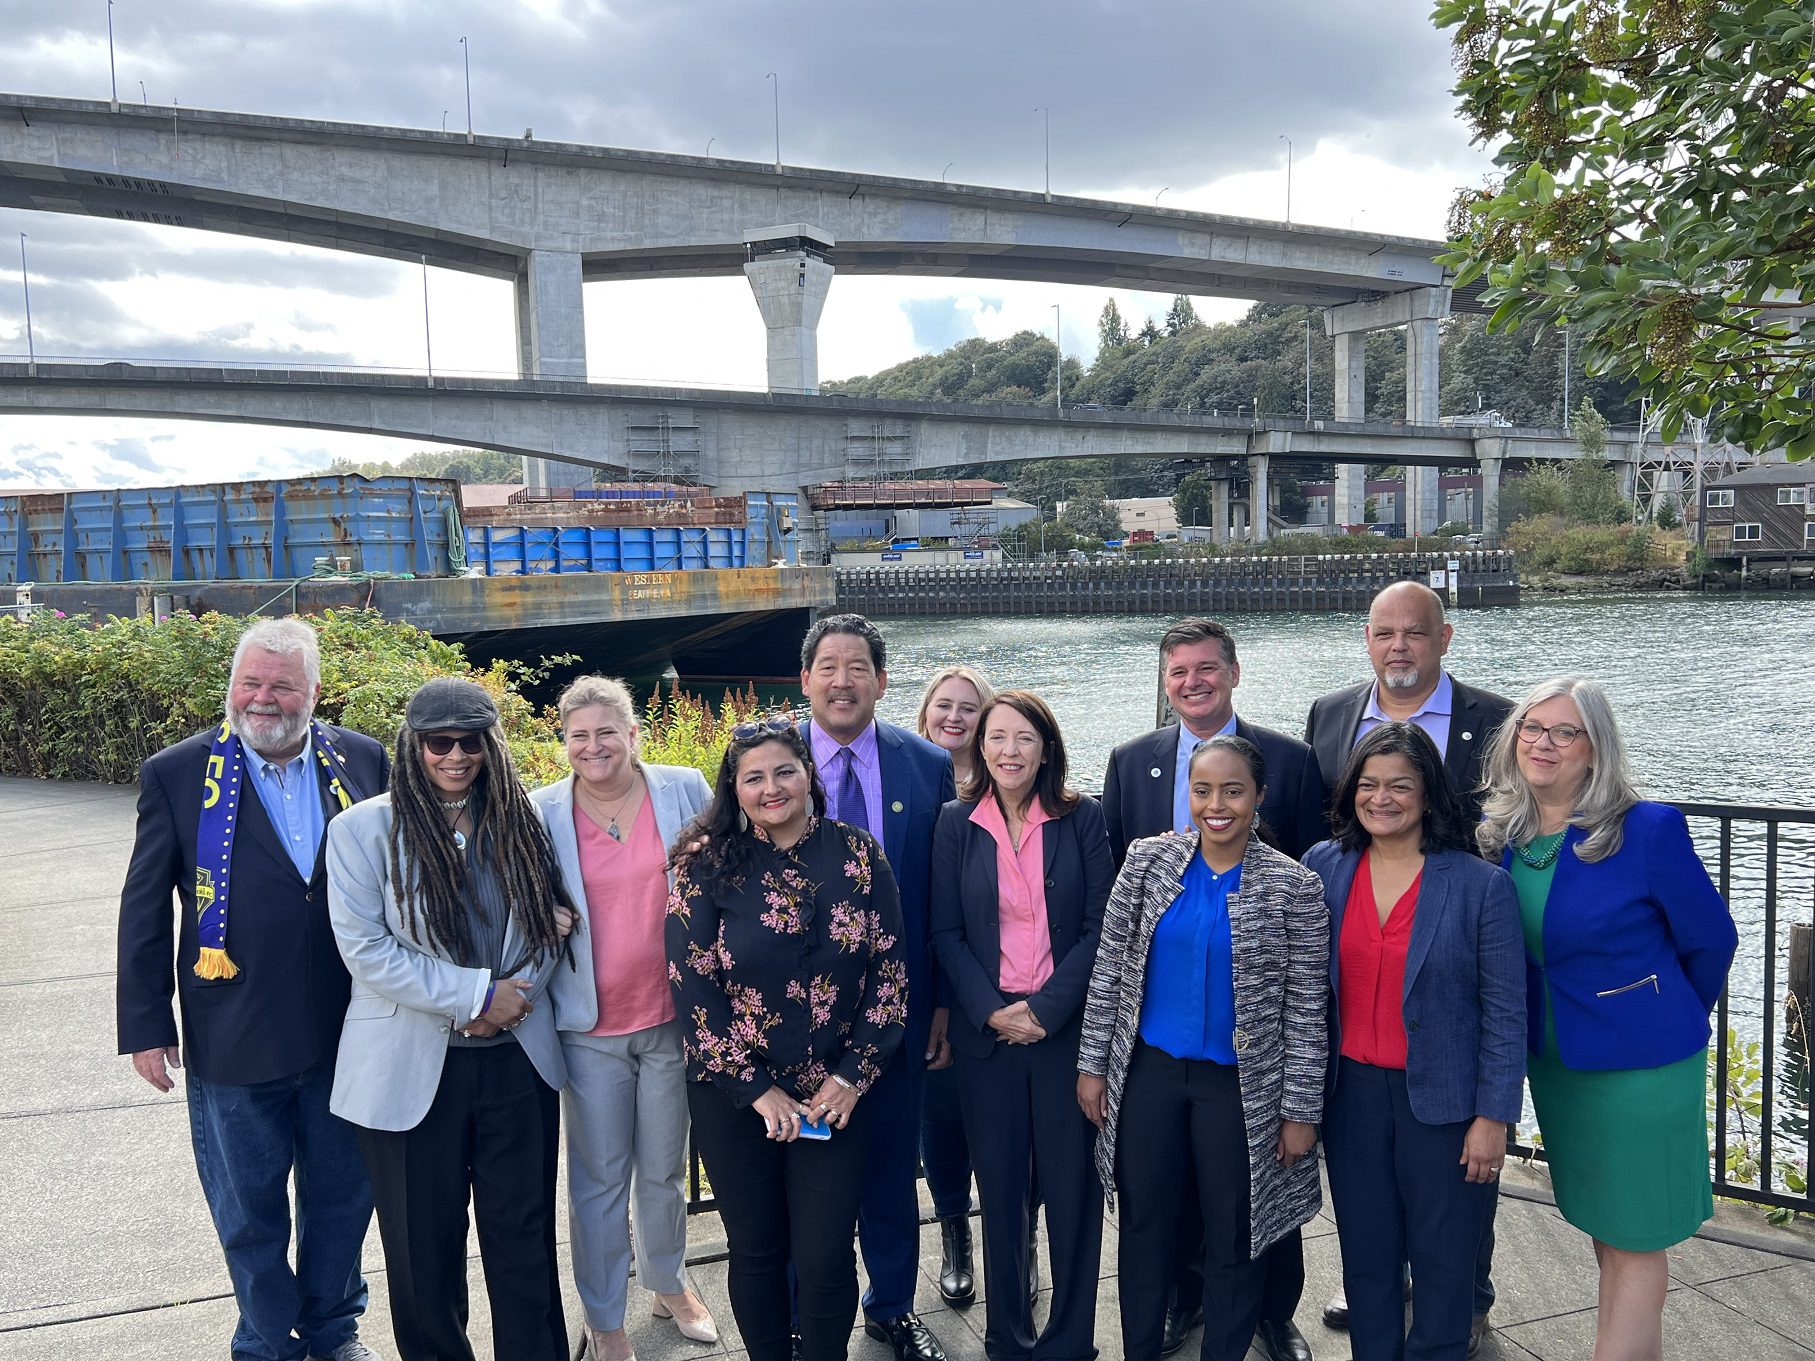 Elected officials, community leaders, City staff members, and other partners stand below the West Seattle Bridge following a press event held on Harbor Island. The high and low bridges are visible, as well as the Duwamish Waterway in the background.